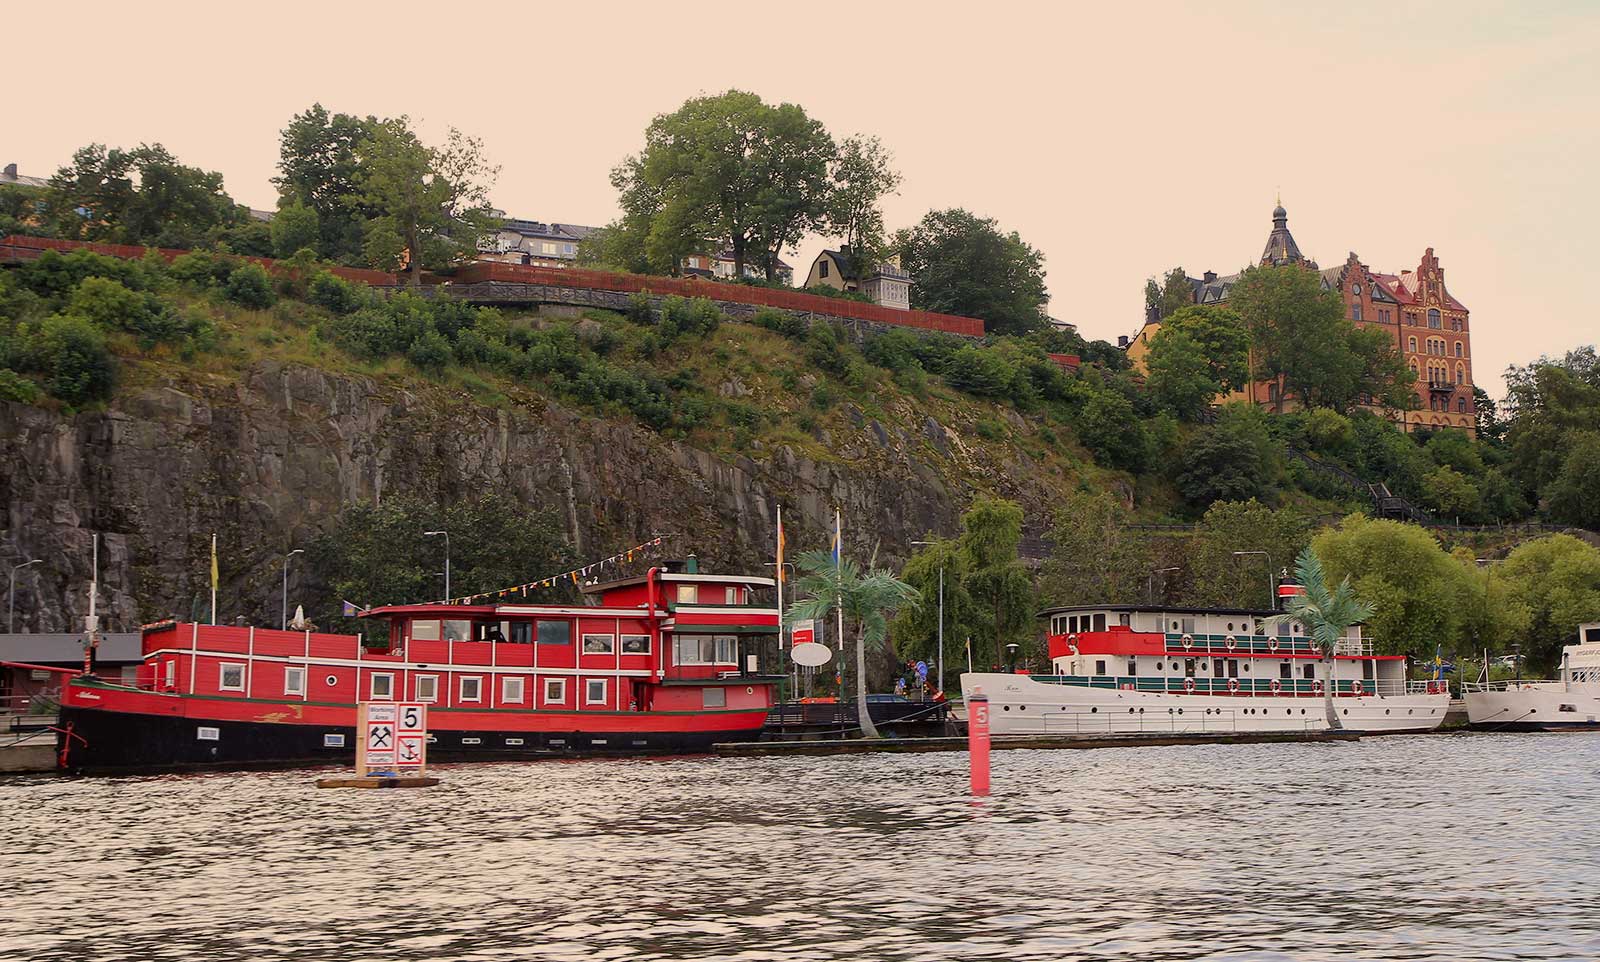 The Red – The Boat and Ran Stockholm